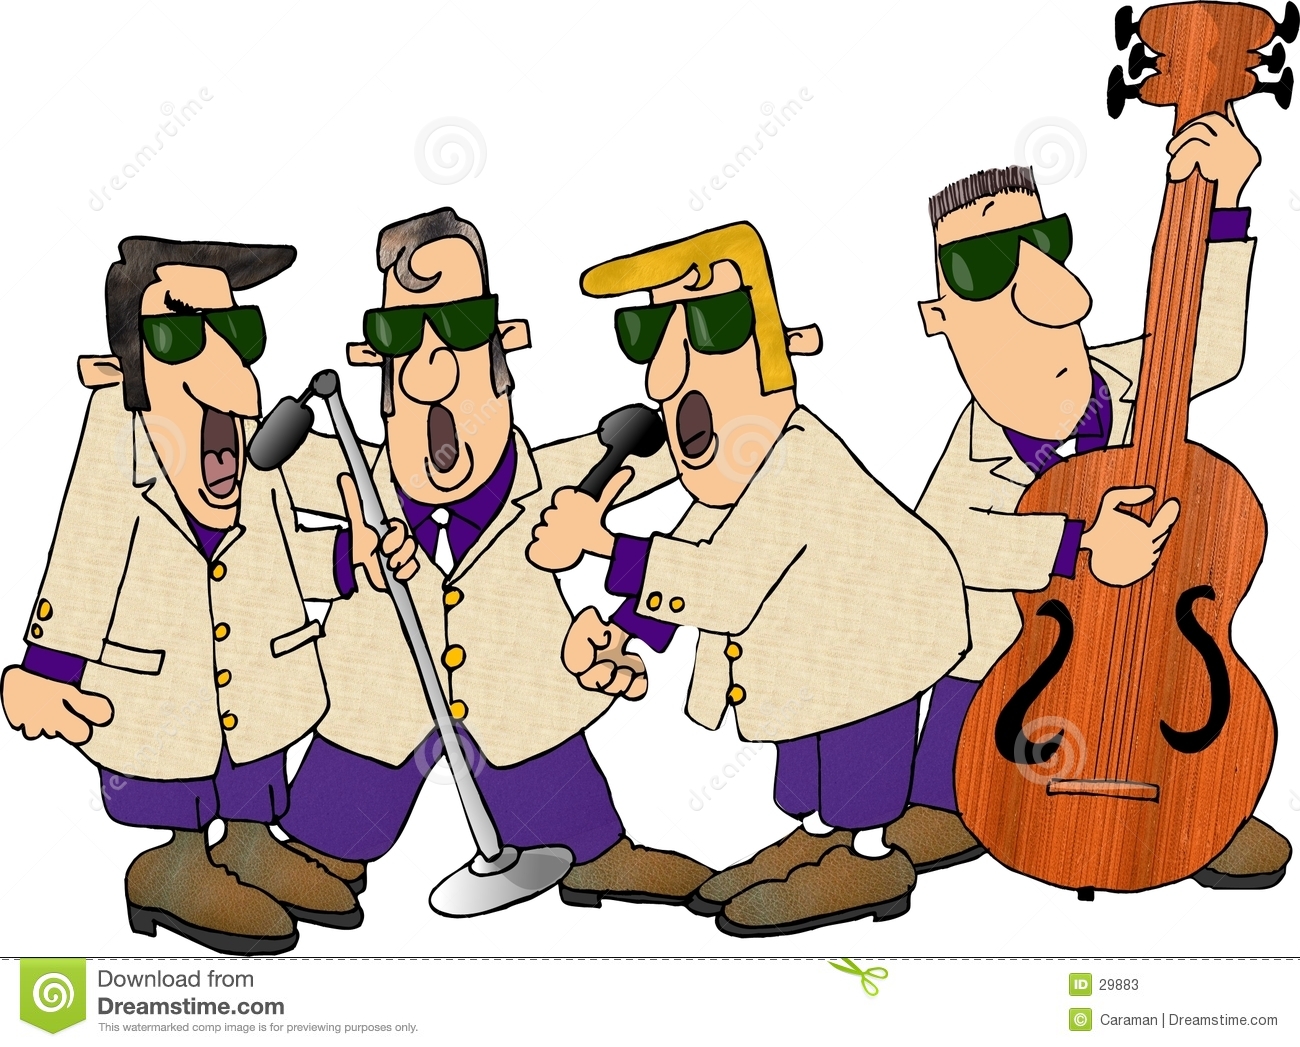 Band clipart pop group. Rock collection images of